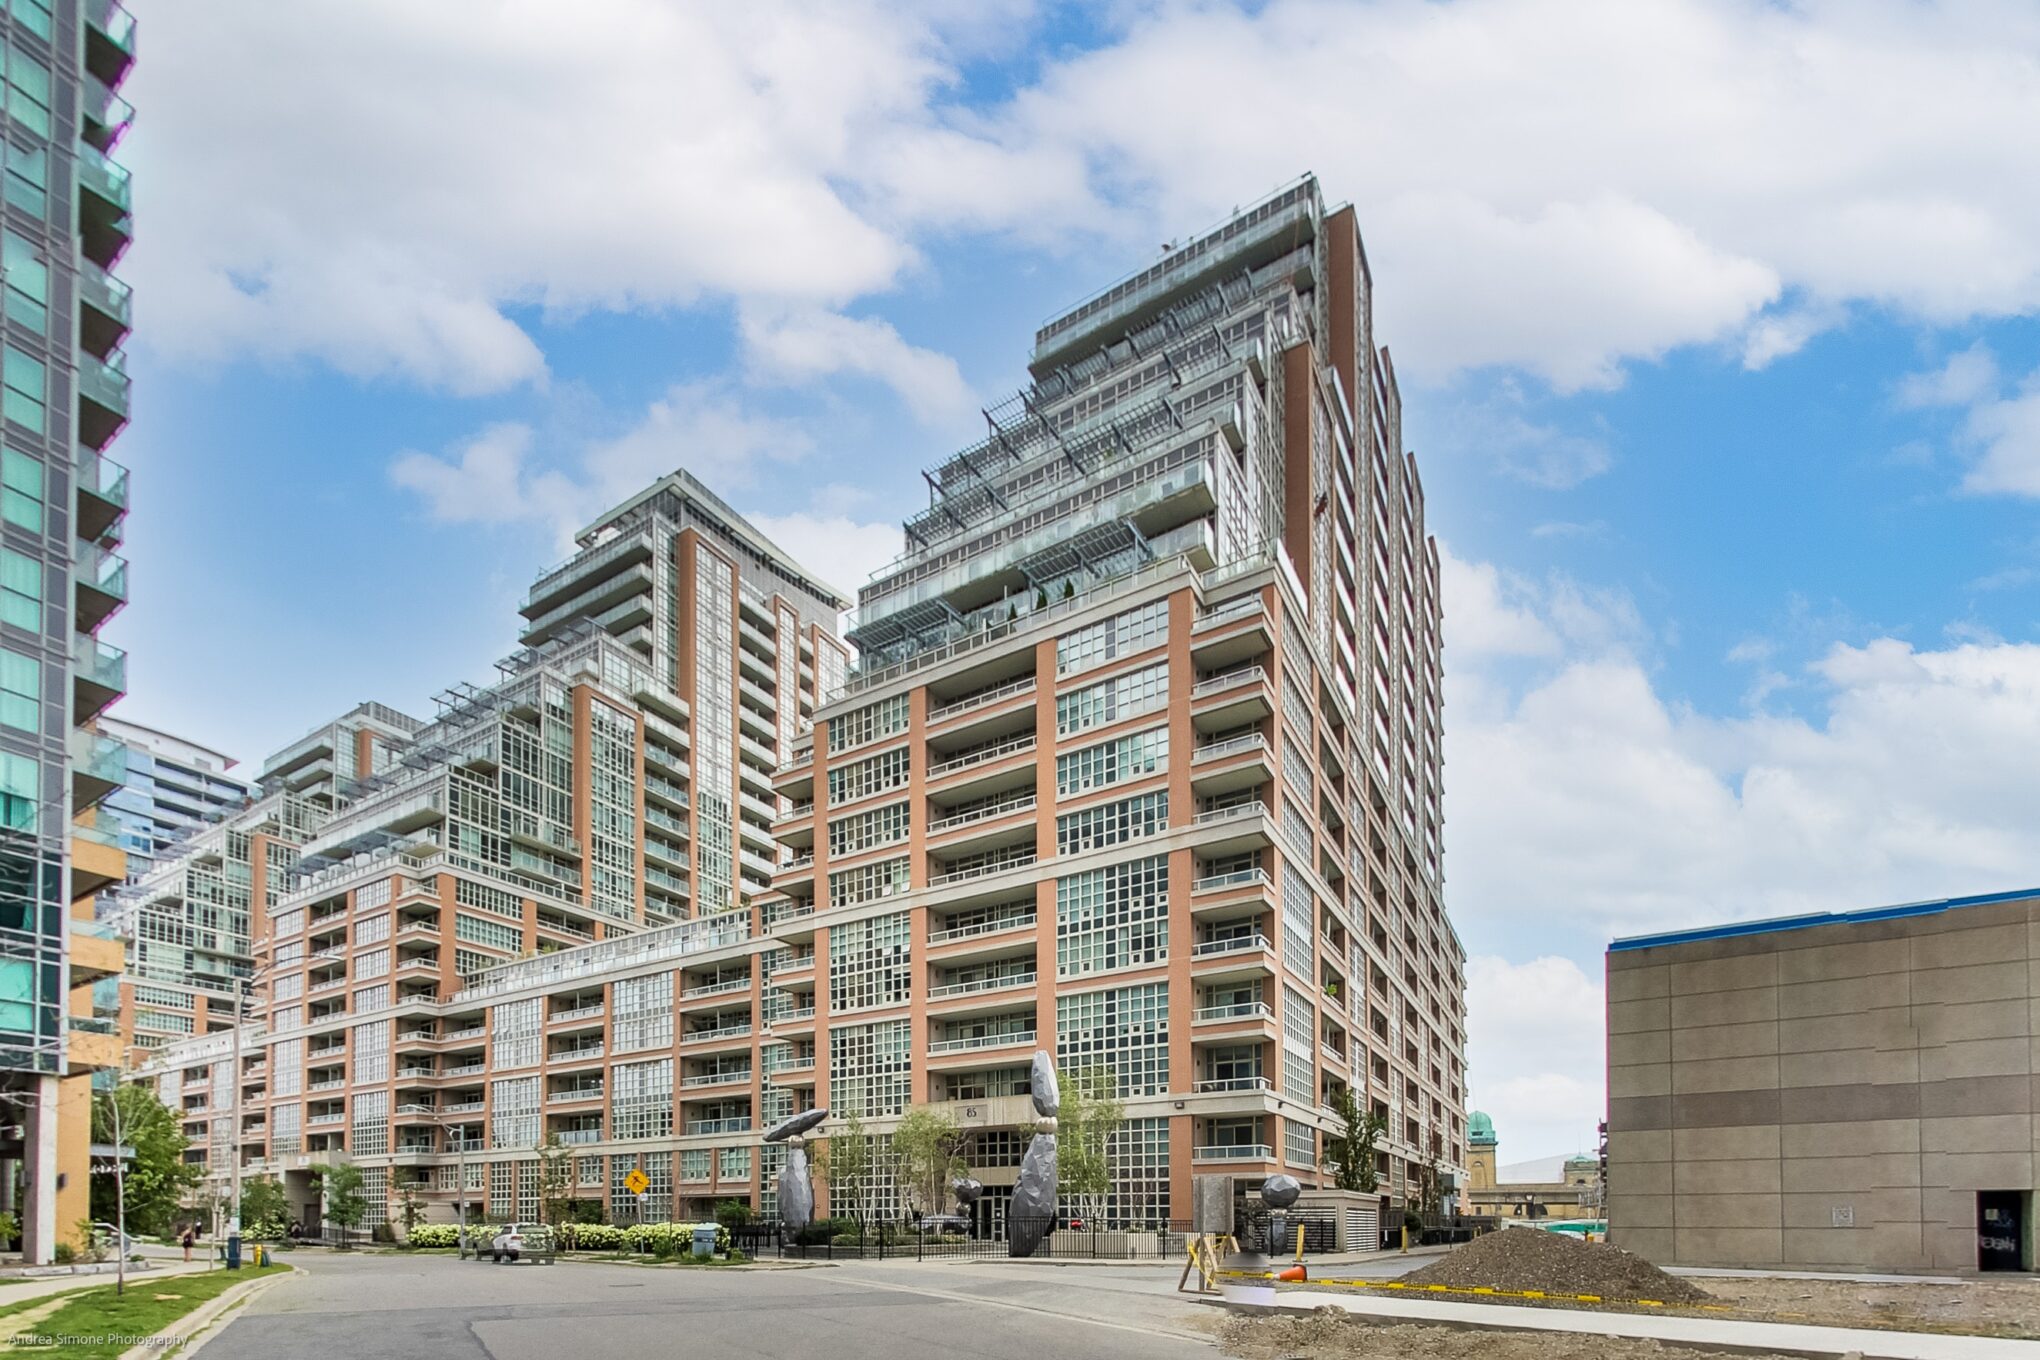 The King West Condos in Liberty Village